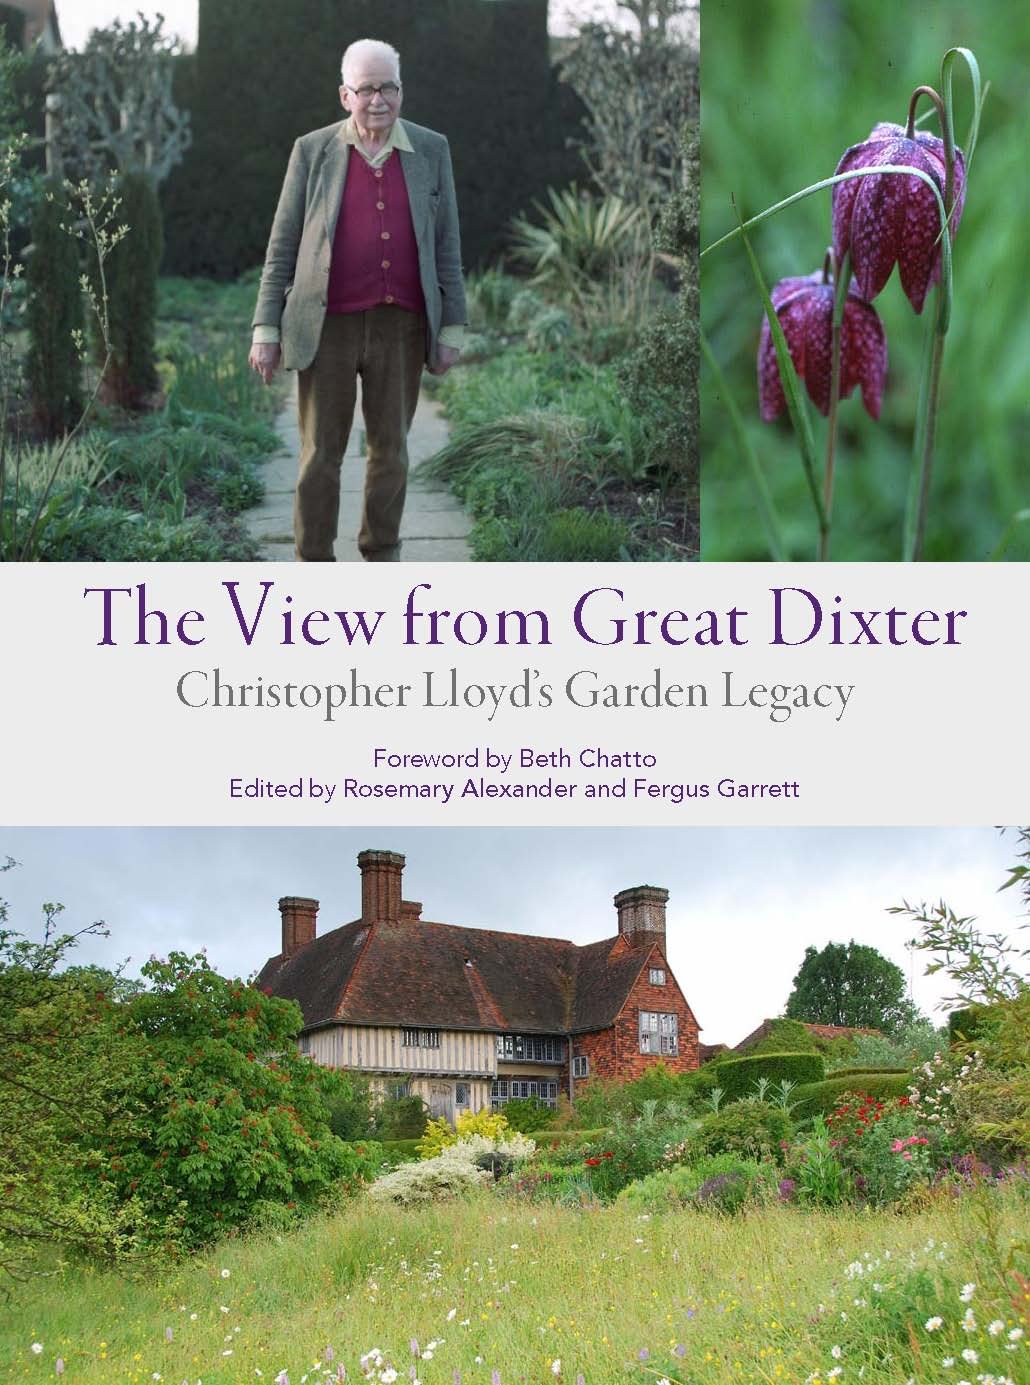 The view from Great Dixter